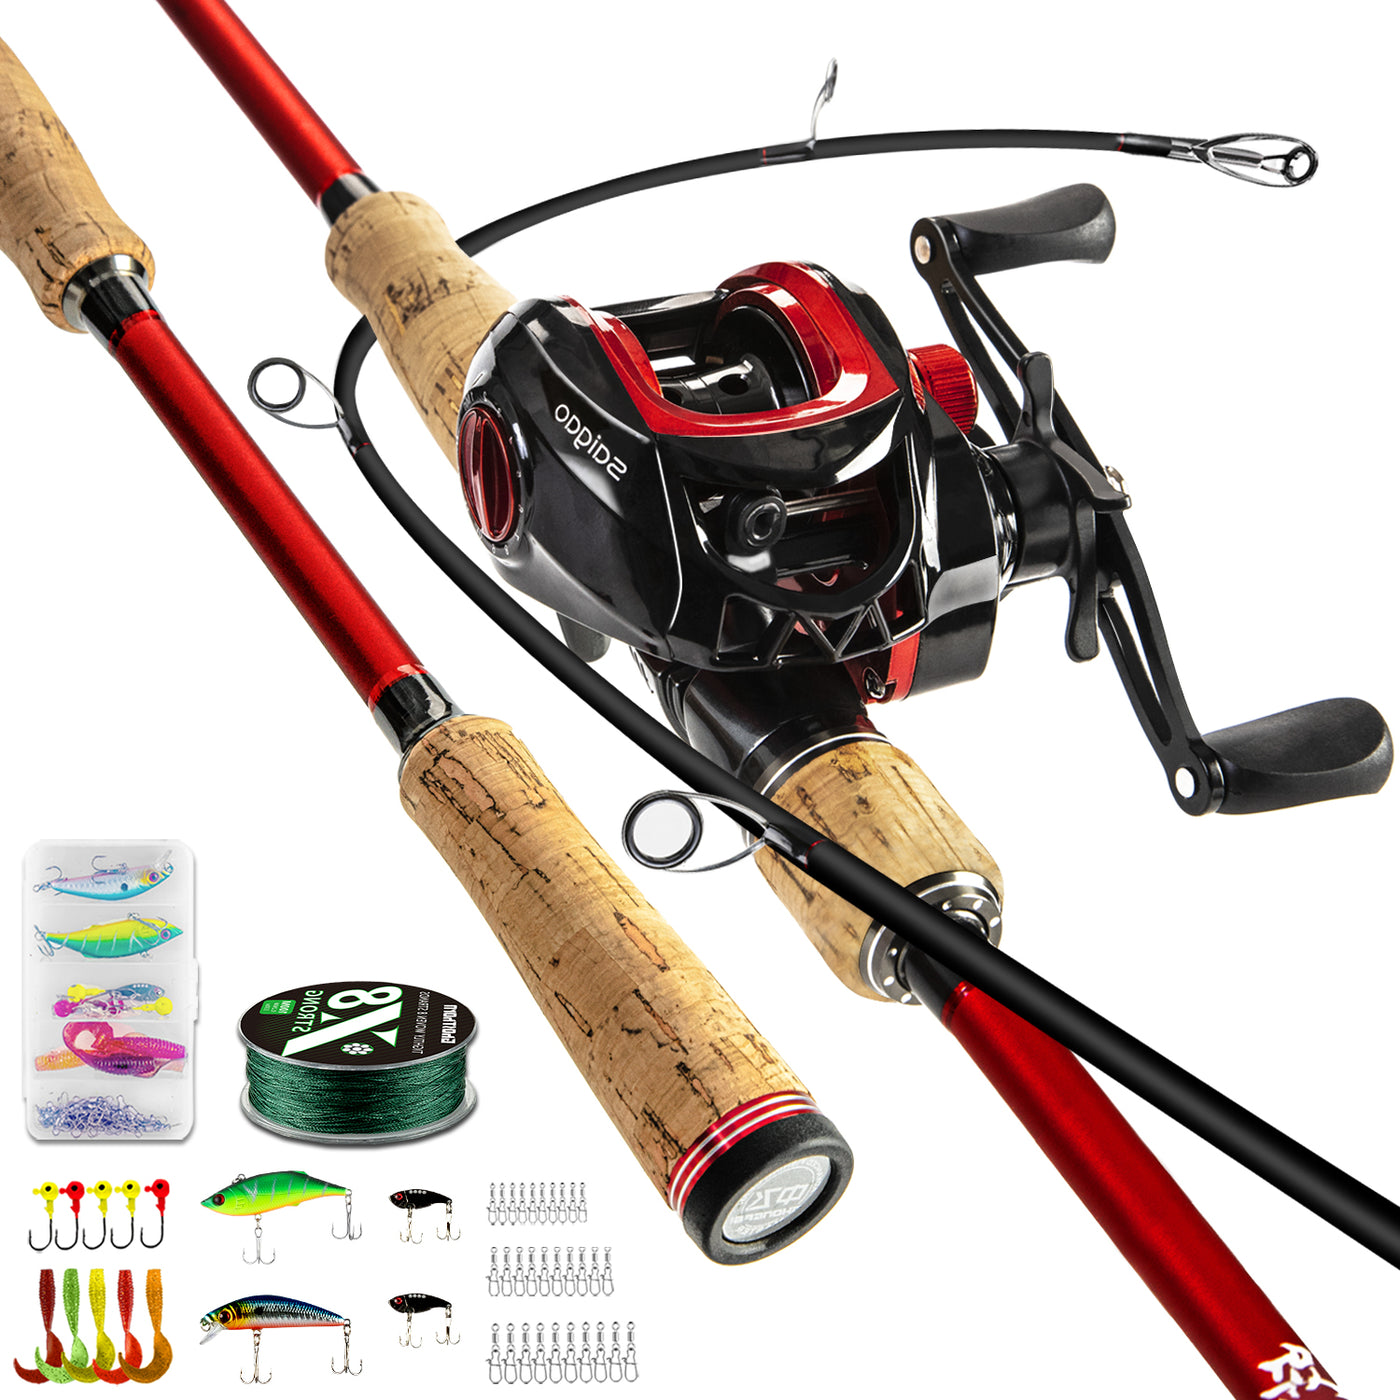 3 Piece Ghosthorn Fishing Rod and Reel Combo, Baitcasting Reel Travel Fishing Rod Portable Kit for Anglers Fishing Gifts for Men Women - Ghosthorn